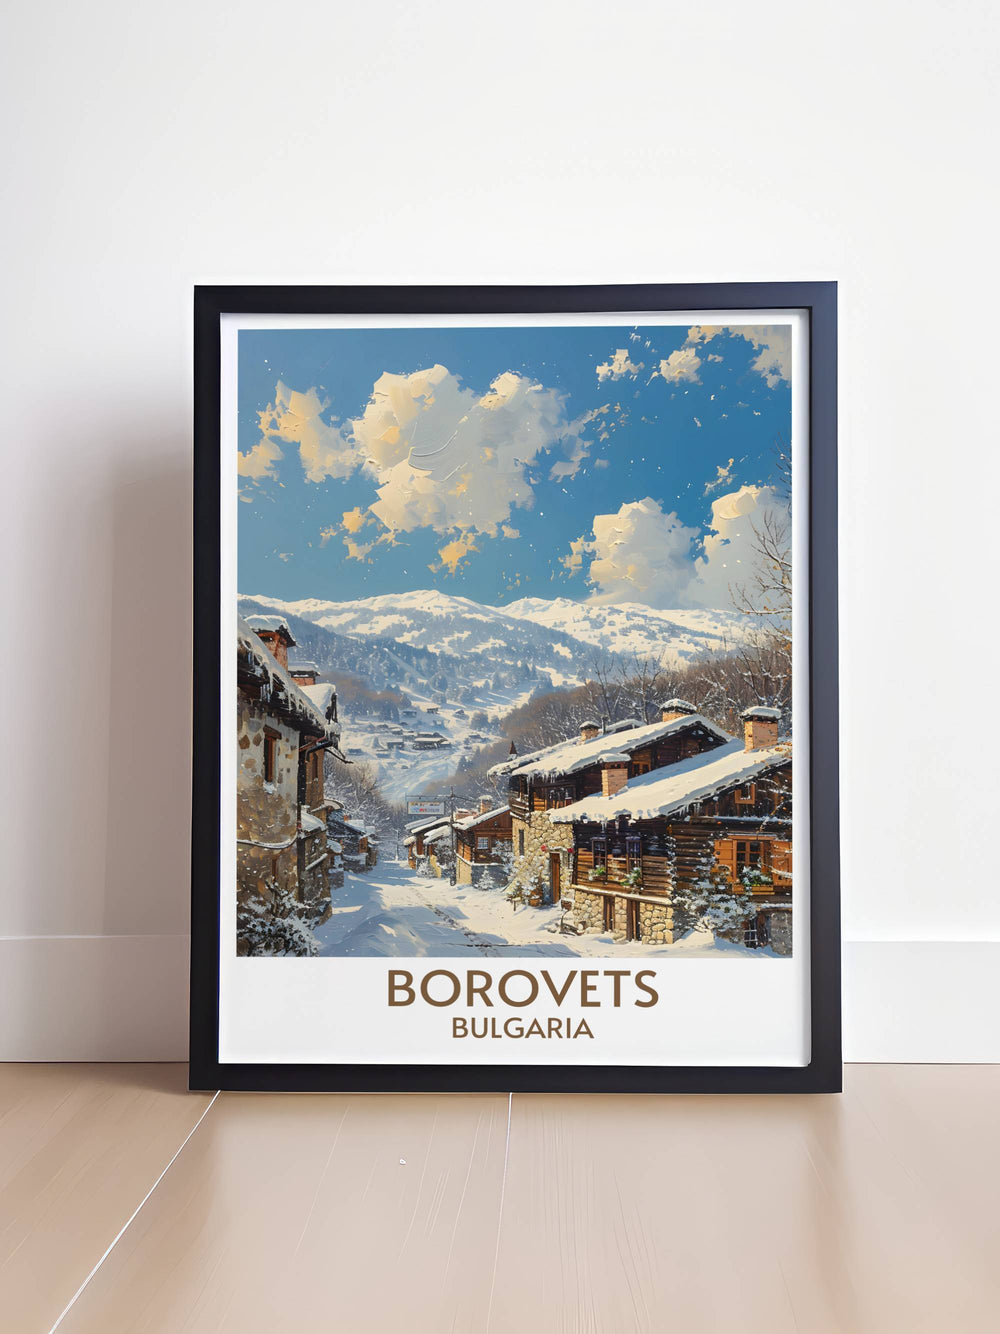 Artistic depiction of Borovets Ski Resort showing skiers and snowboarders on snowy mountains vibrant colors enhancing the winter atmosphere